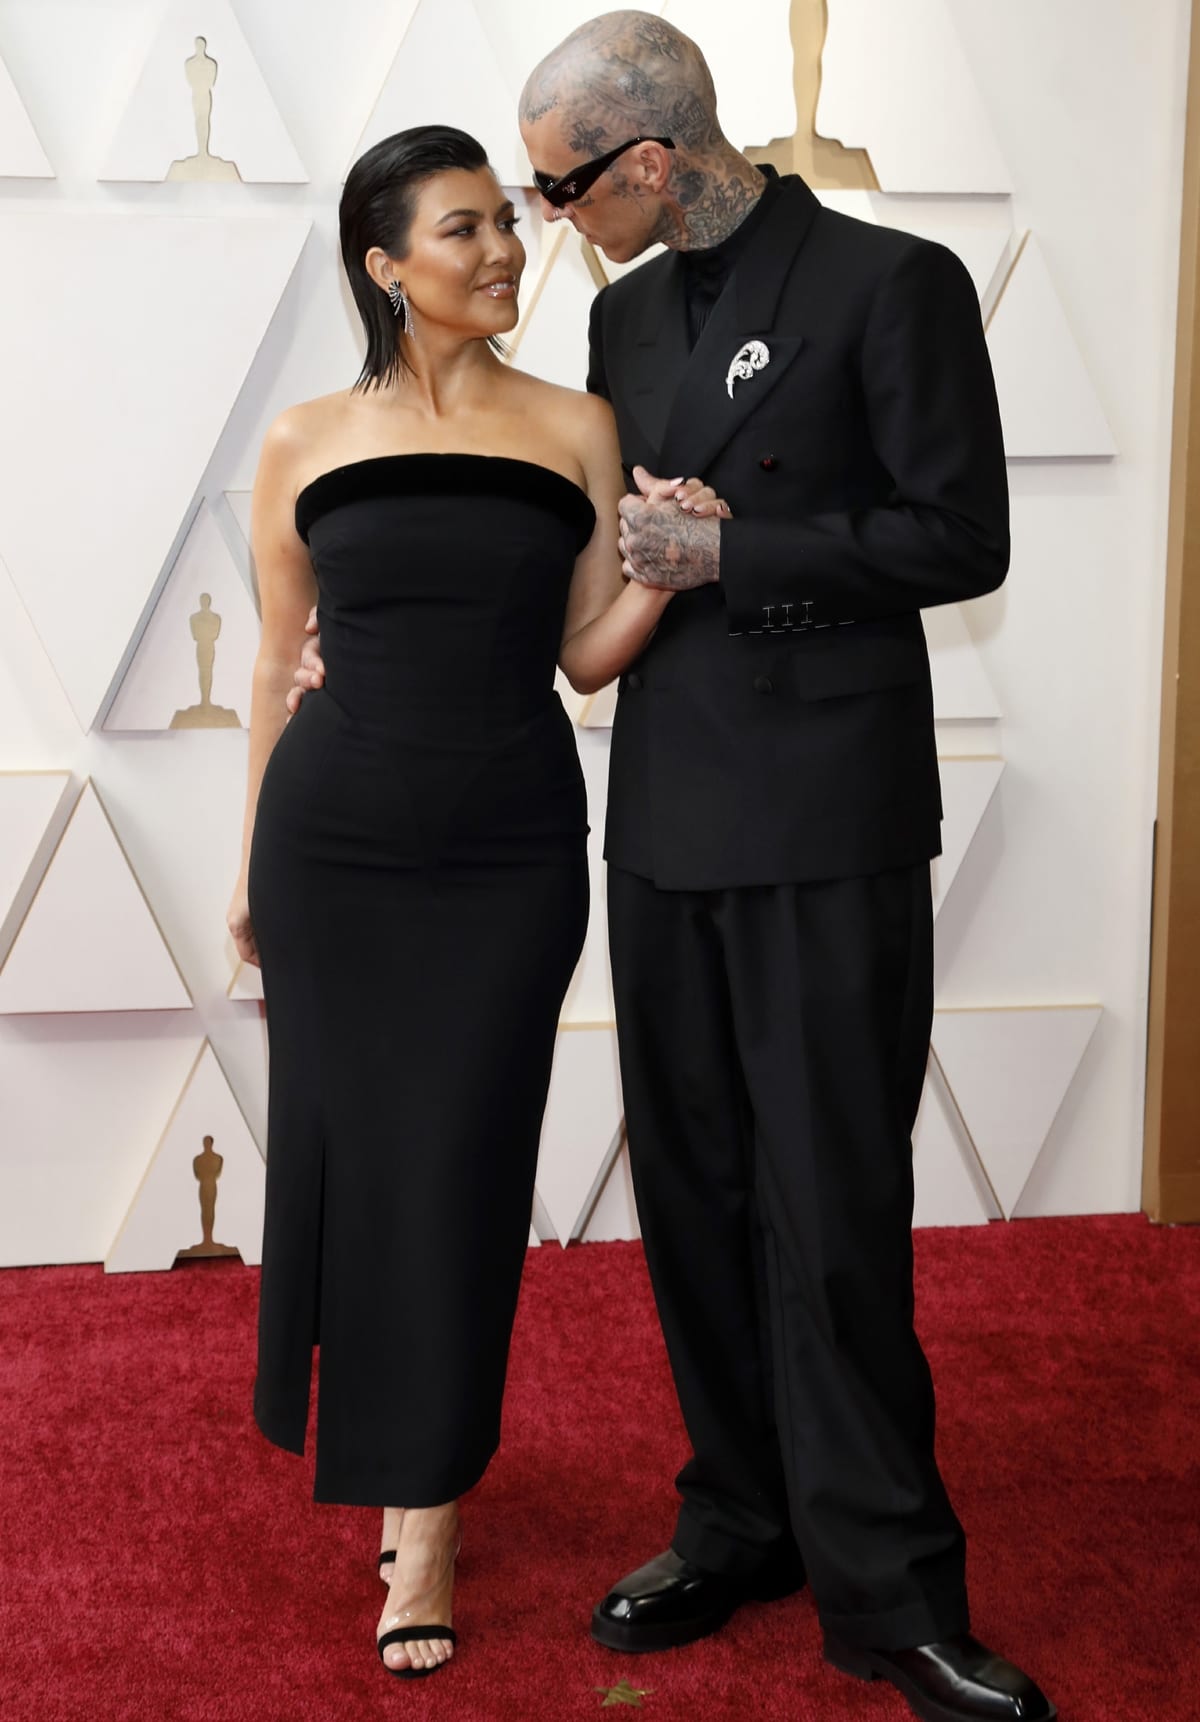 Kourtney Kardashian in a Mugler dress and Aquazzura shoes and Travis Barker in a Maison Margiela suit at the 94th Annual Academy Awards